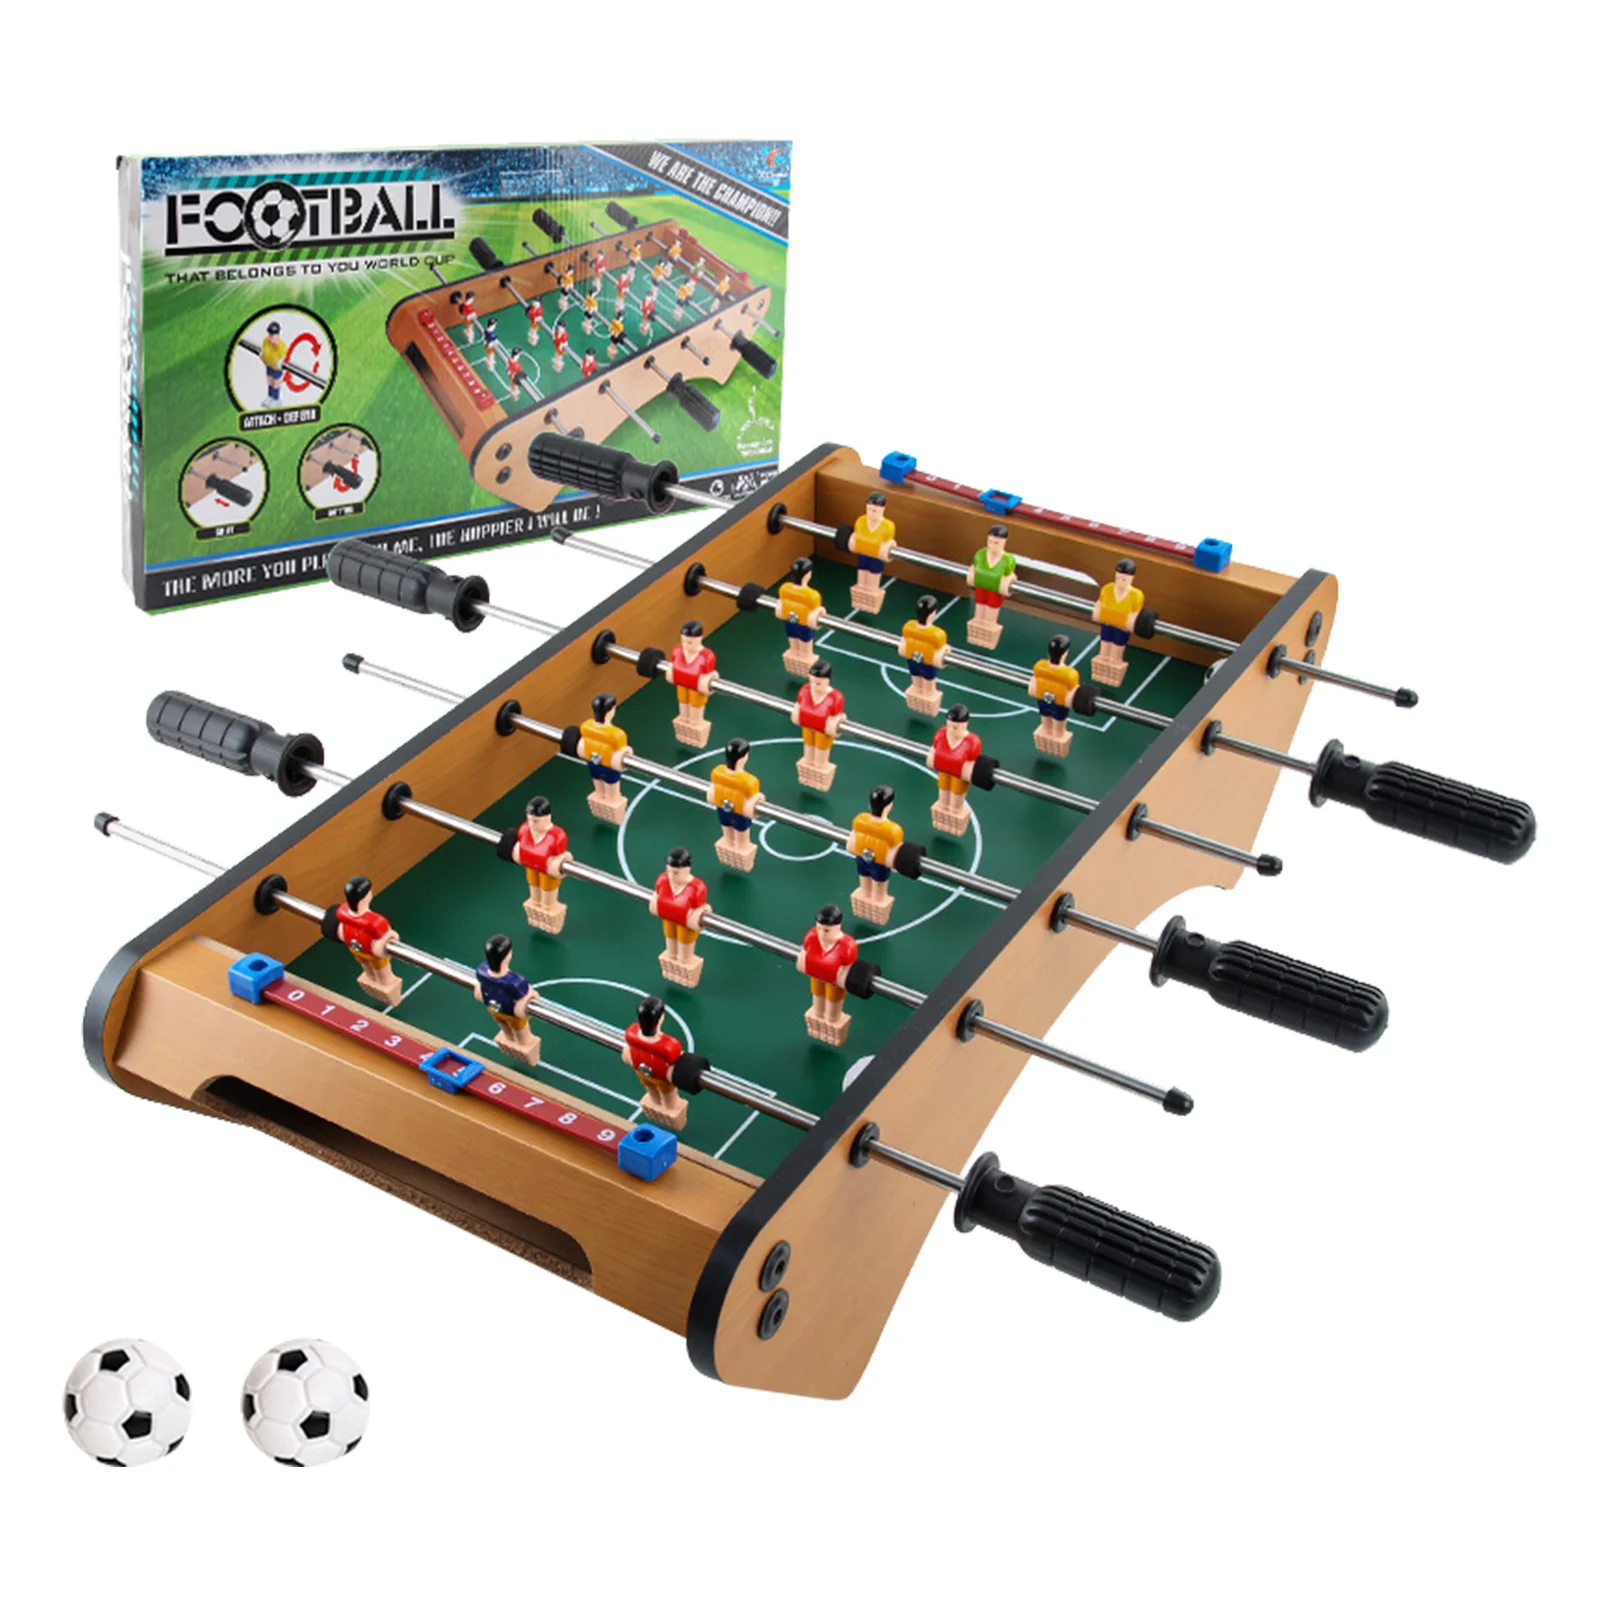 Fun Table Soccer Toy Sport Game Interactive Party Toy keebgyy Mini Tabletop Soccer Game Educational Puzzle Toy for Kids Adults Gift